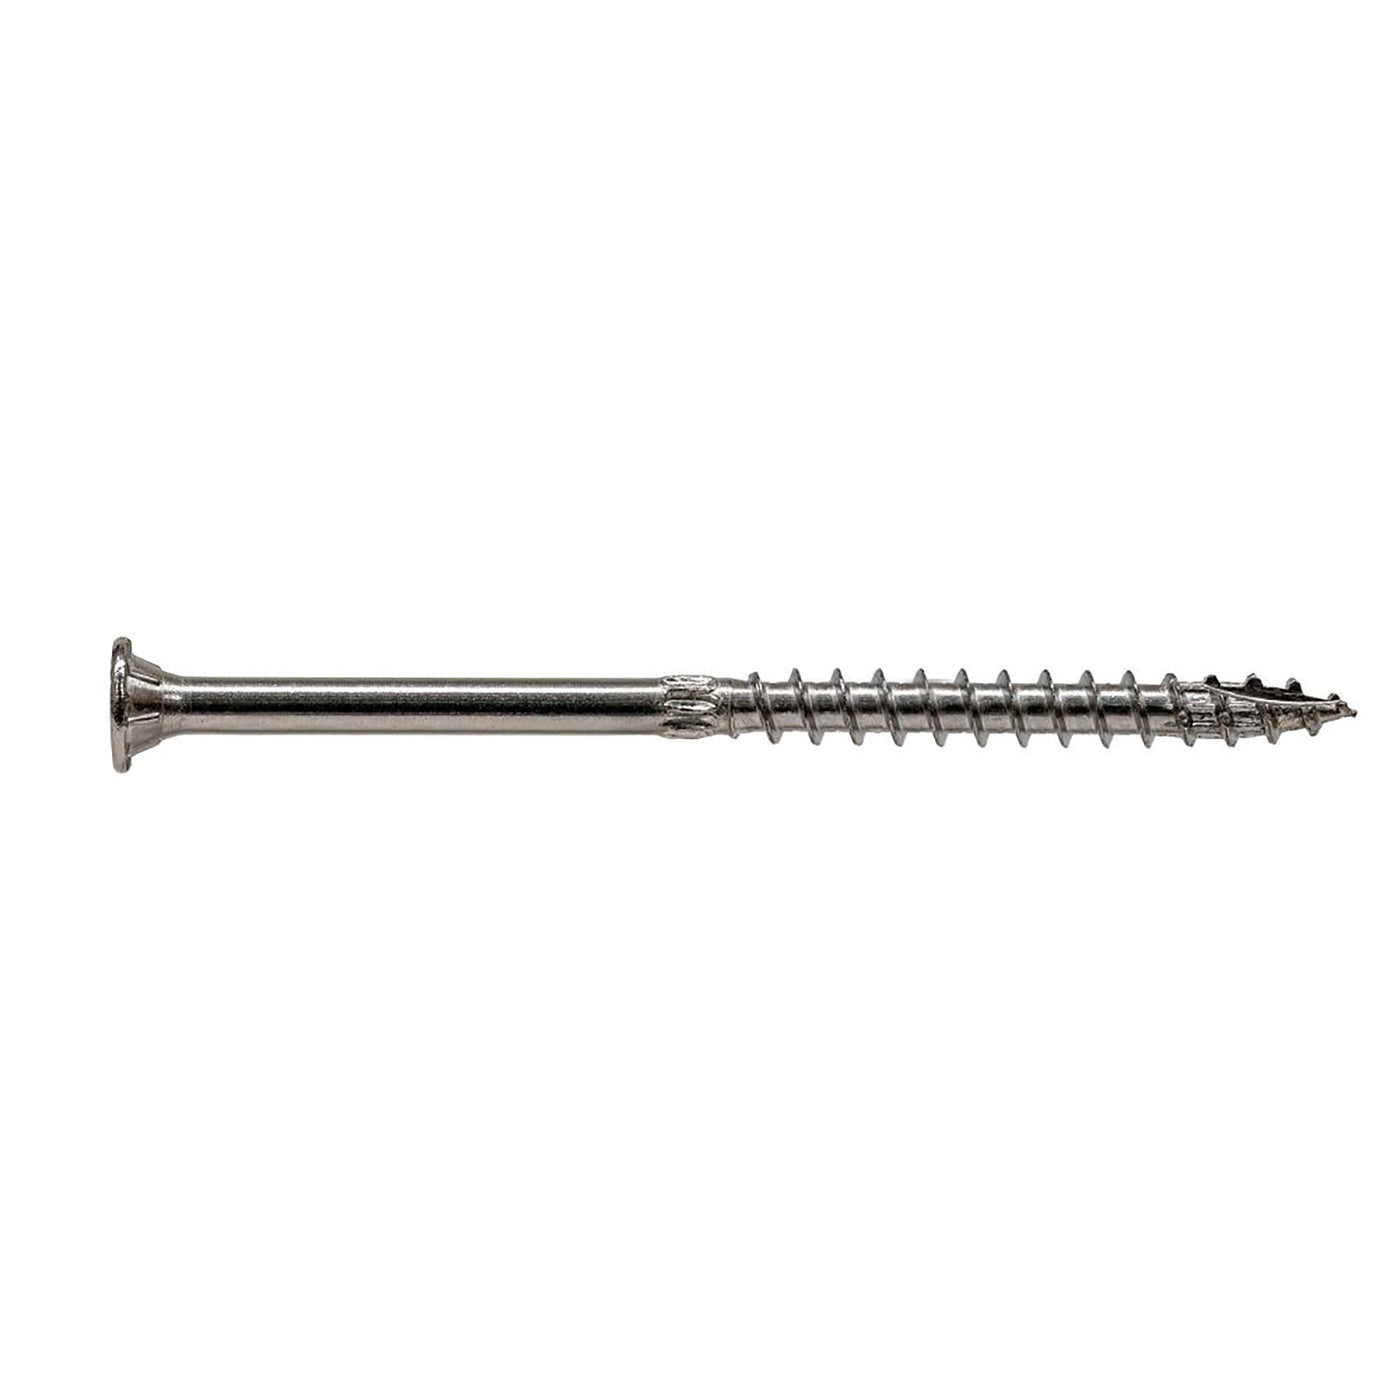 0.276 x 4 Simpson Strong-Drive® SDWS TIMBER SS Screw 316 Stainless Steel (T50 6-Lobe) - Box (10)